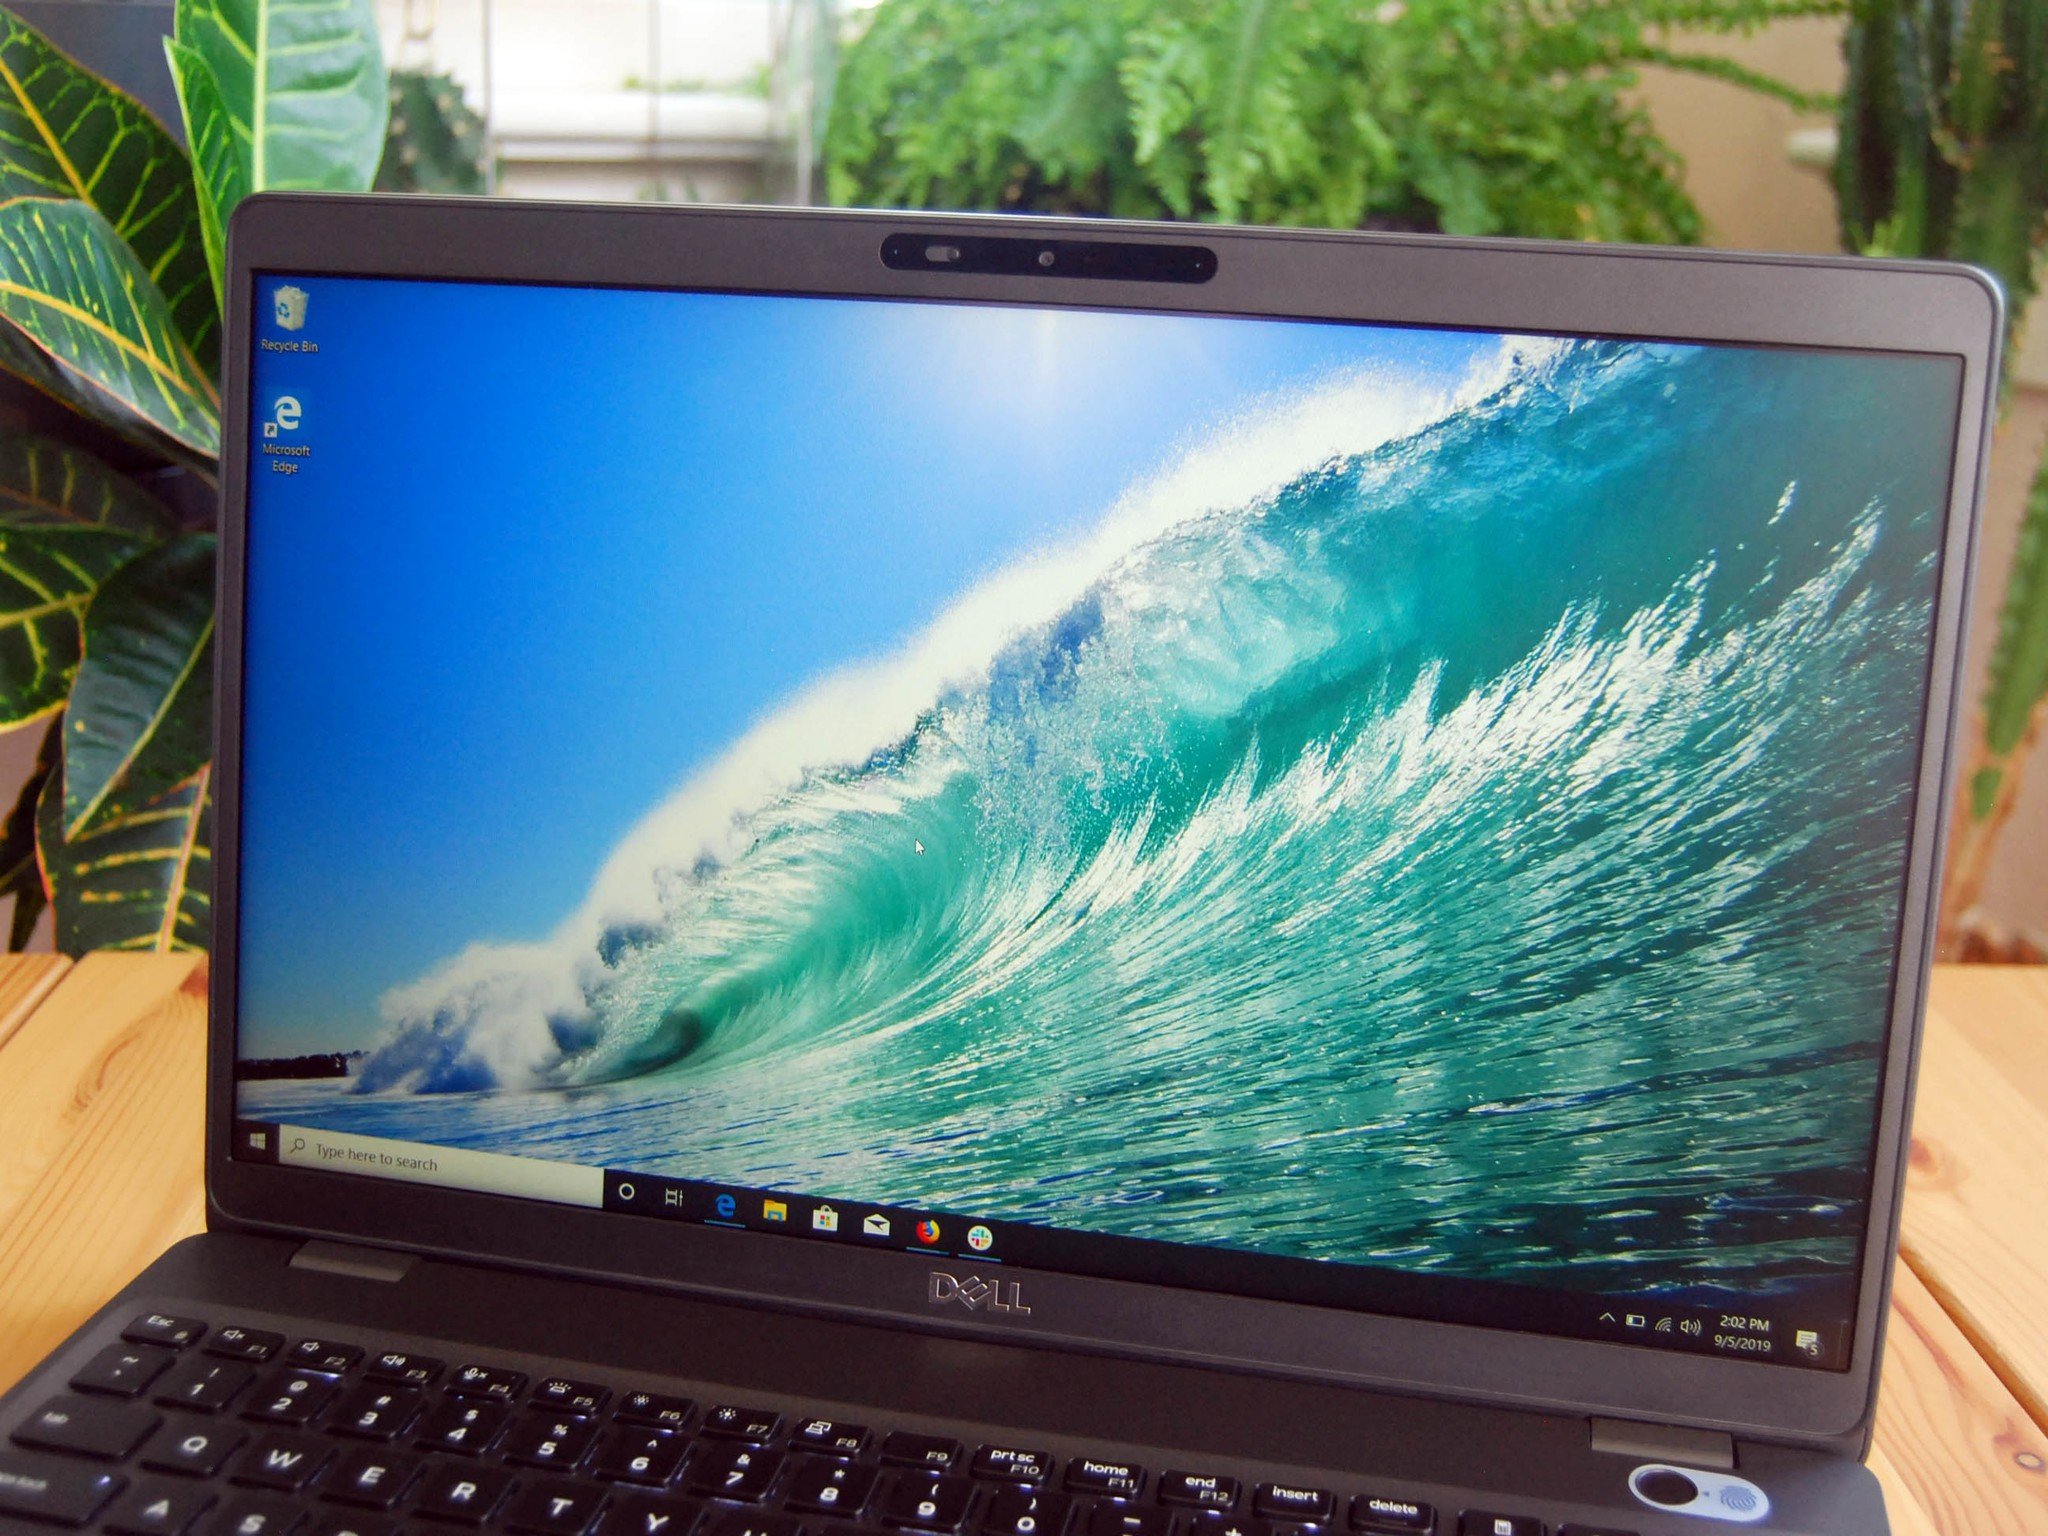 Dell Precision 3541 review: Budget mobile workstation with many 